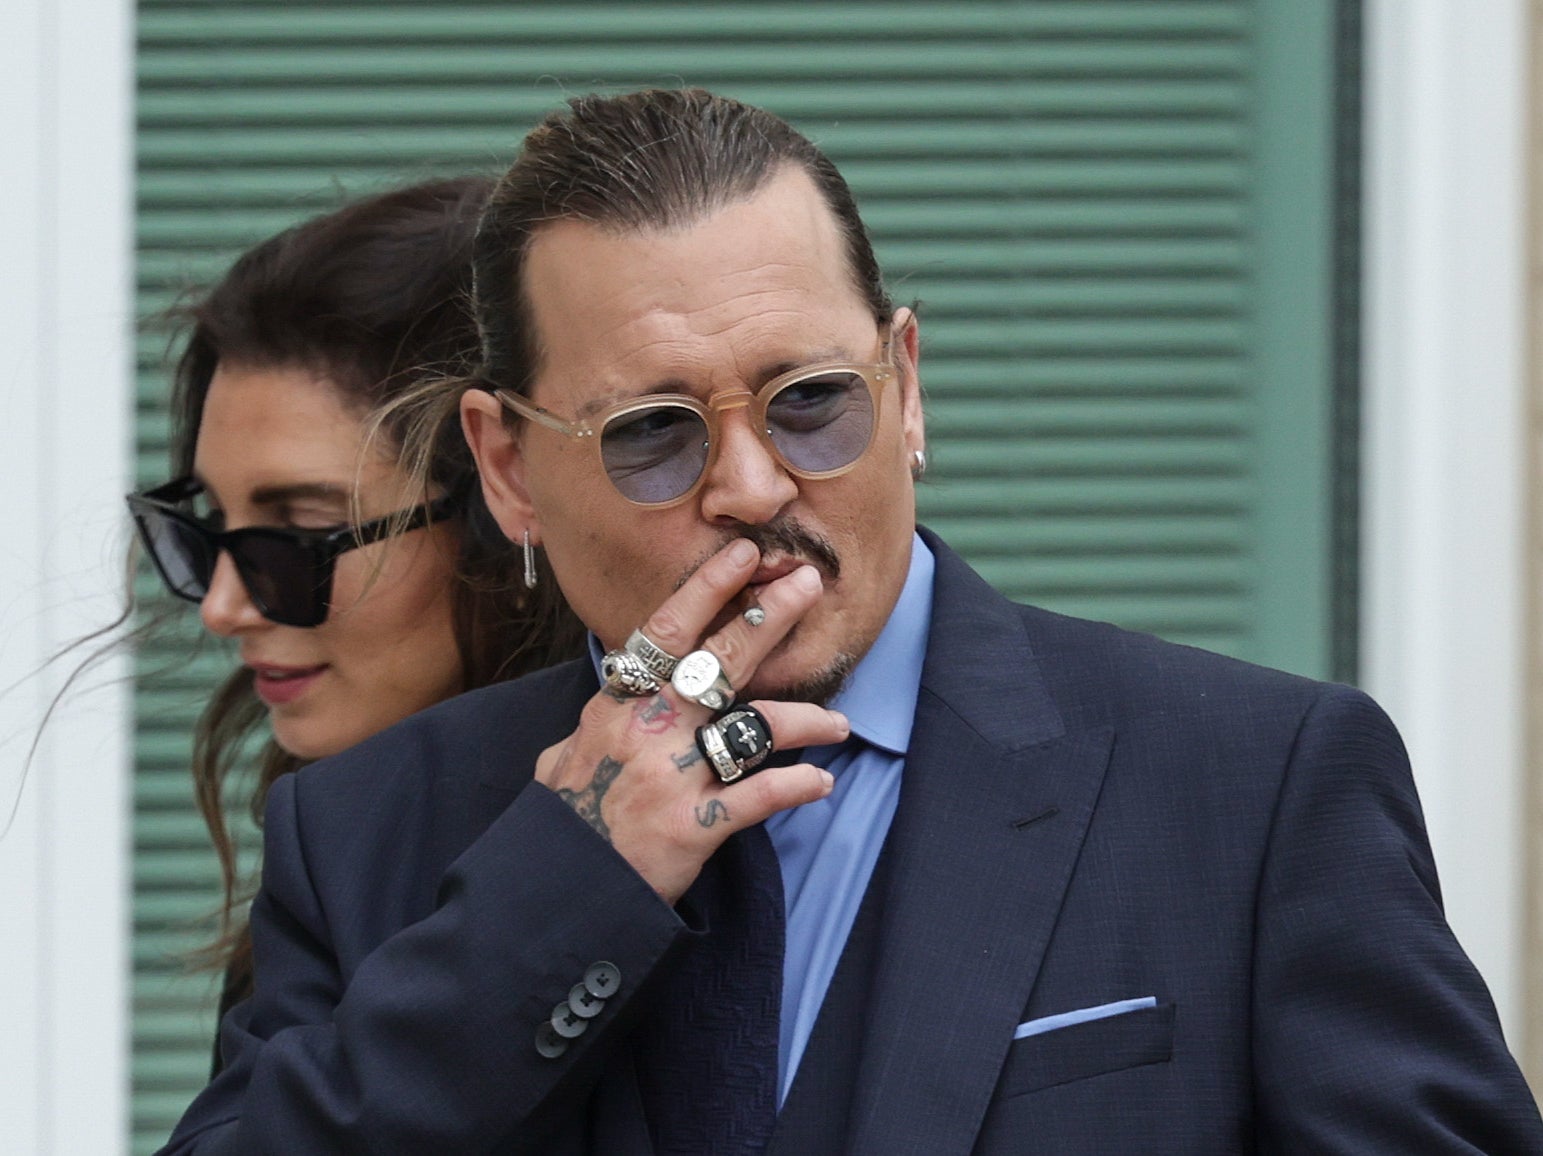 Depp smokes outside court during the defamation trial against ex-wife Amber Heard